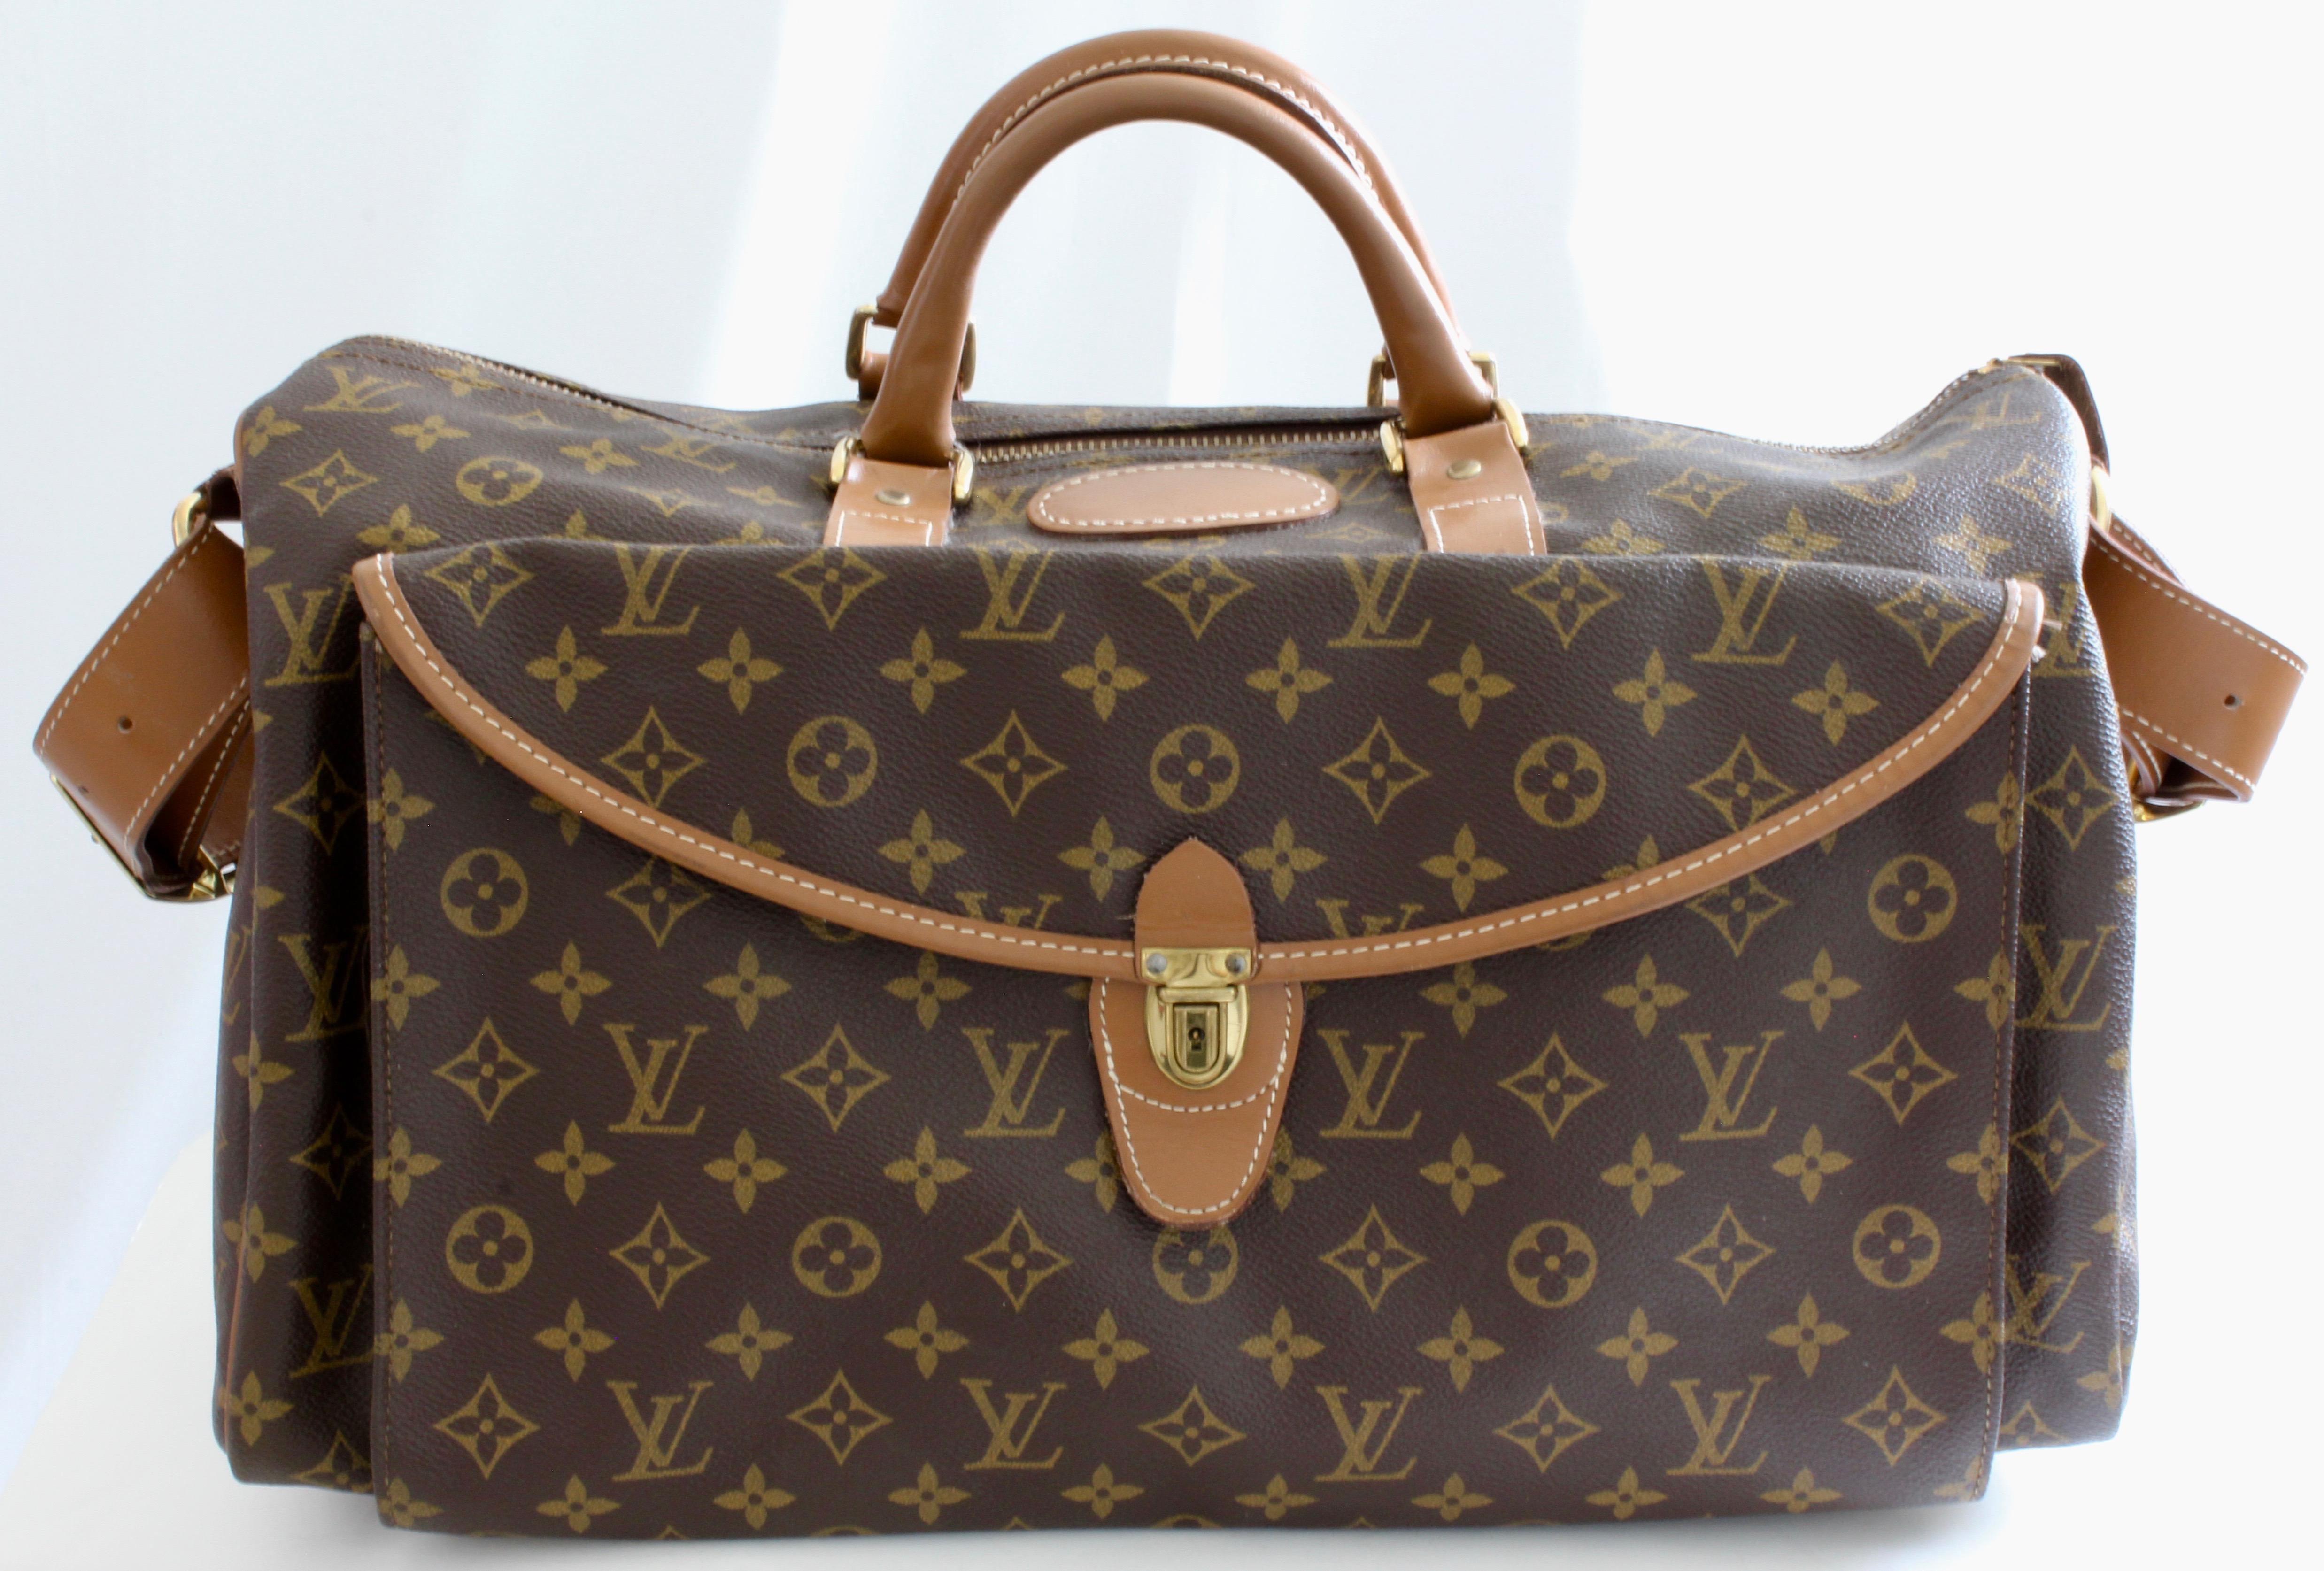 Here's an opportunity to own a very unique and very RARE vintage bag from Louis Vuitton by The French Company, most likely made in the late 1970s. This large duffel or tote bag is ideal for weekend travel and features a substantial main compartment